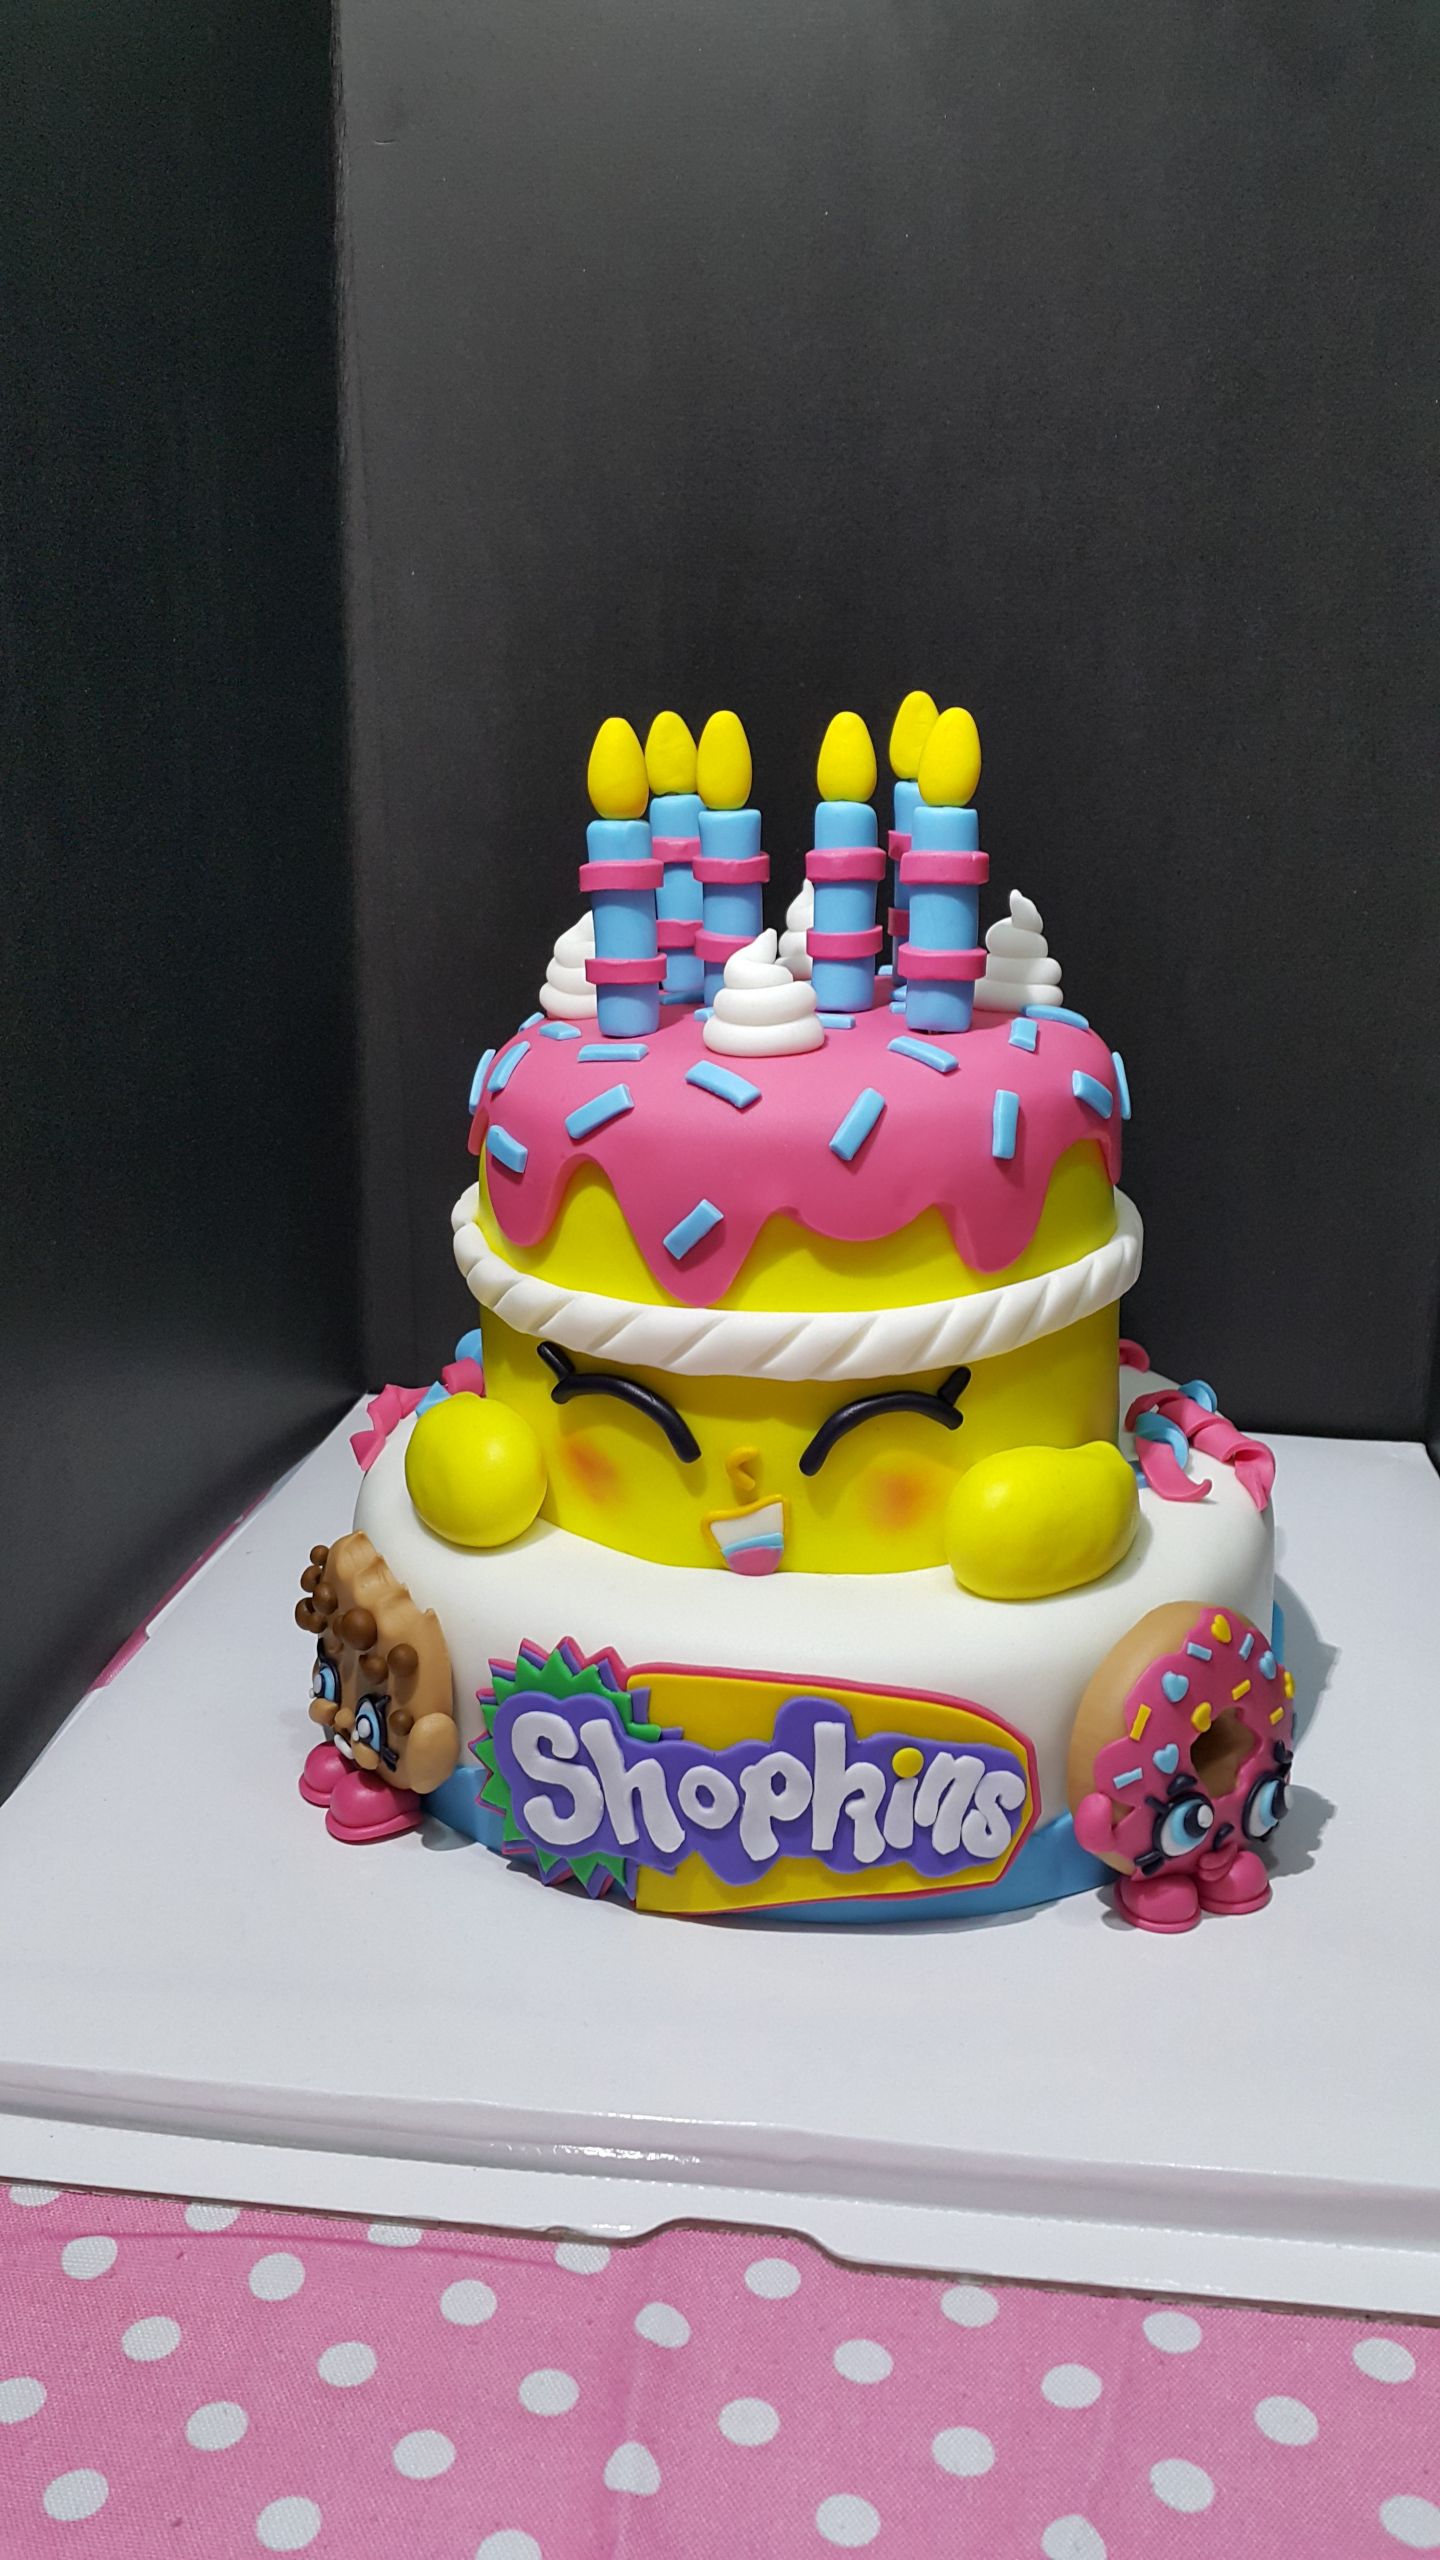 Best Shopkins Birthday Cake
 Collections